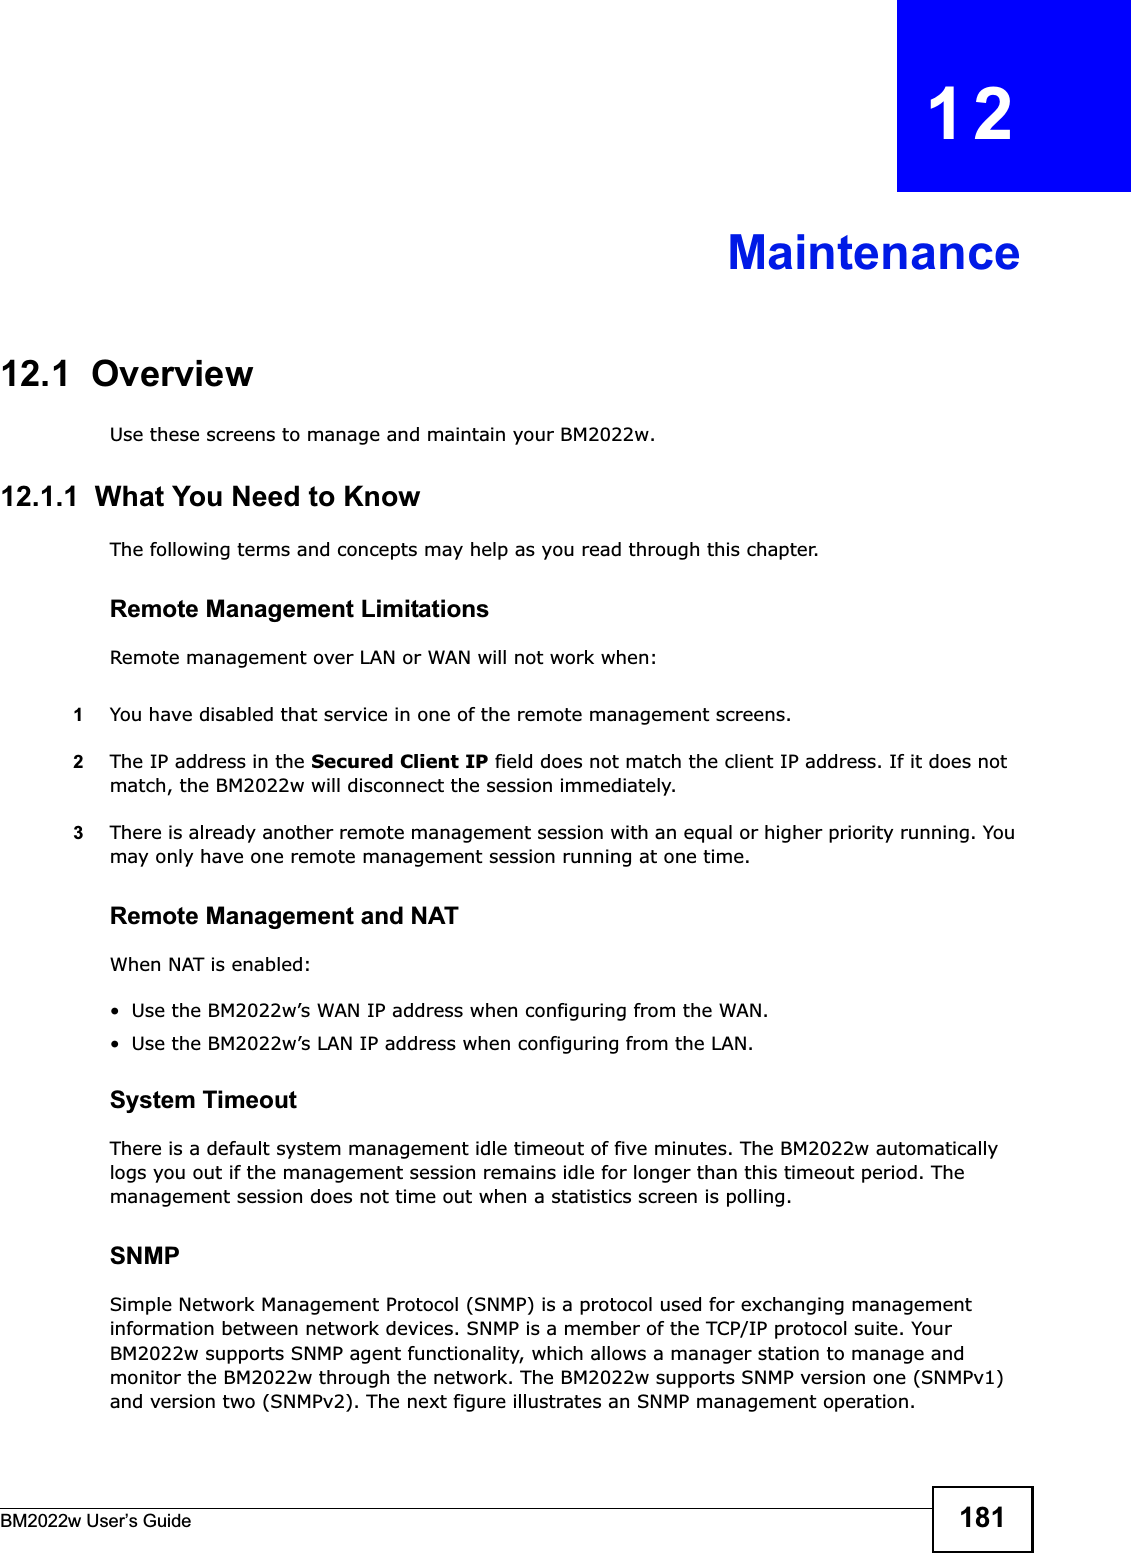 BM2022w User’s Guide 181CHAPTER   12Maintenance12.1  OverviewUse these screens to manage and maintain your BM2022w.12.1.1  What You Need to KnowThe following terms and concepts may help as you read through this chapter.Remote Management LimitationsRemote management over LAN or WAN will not work when:1You have disabled that service in one of the remote management screens.2The IP address in the Secured Client IP field does not match the client IP address. If it does not match, the BM2022w will disconnect the session immediately.3There is already another remote management session with an equal or higher priority running. You may only have one remote management session running at one time.Remote Management and NATWhen NAT is enabled:• Use the BM2022w’s WAN IP address when configuring from the WAN. • Use the BM2022w’s LAN IP address when configuring from the LAN.System TimeoutThere is a default system management idle timeout of five minutes. The BM2022w automatically logs you out if the management session remains idle for longer than this timeout period. The management session does not time out when a statistics screen is polling.SNMPSimple Network Management Protocol (SNMP) is a protocol used for exchanging management information between network devices. SNMP is a member of the TCP/IP protocol suite. Your BM2022w supports SNMP agent functionality, which allows a manager station to manage and monitor the BM2022w through the network. The BM2022w supports SNMP version one (SNMPv1) and version two (SNMPv2). The next figure illustrates an SNMP management operation.